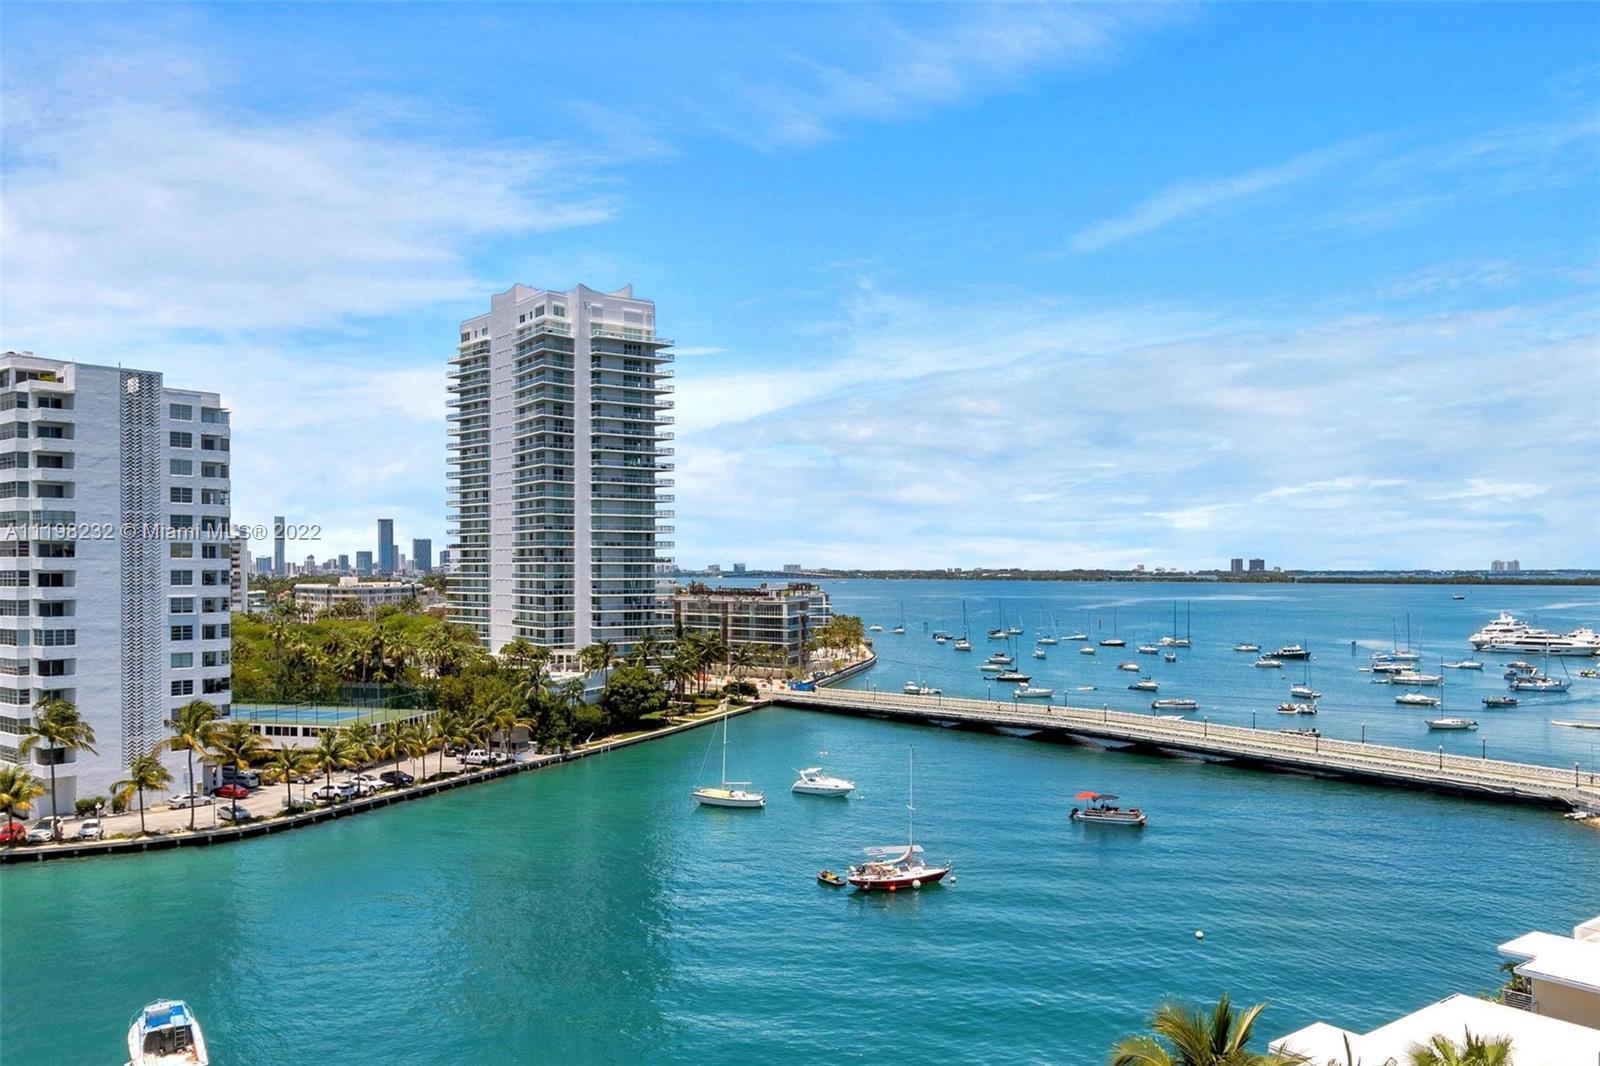 Breathtaking waterfront views of Miami’s Biscayne Bay in this centrally located yet tucked-away bout